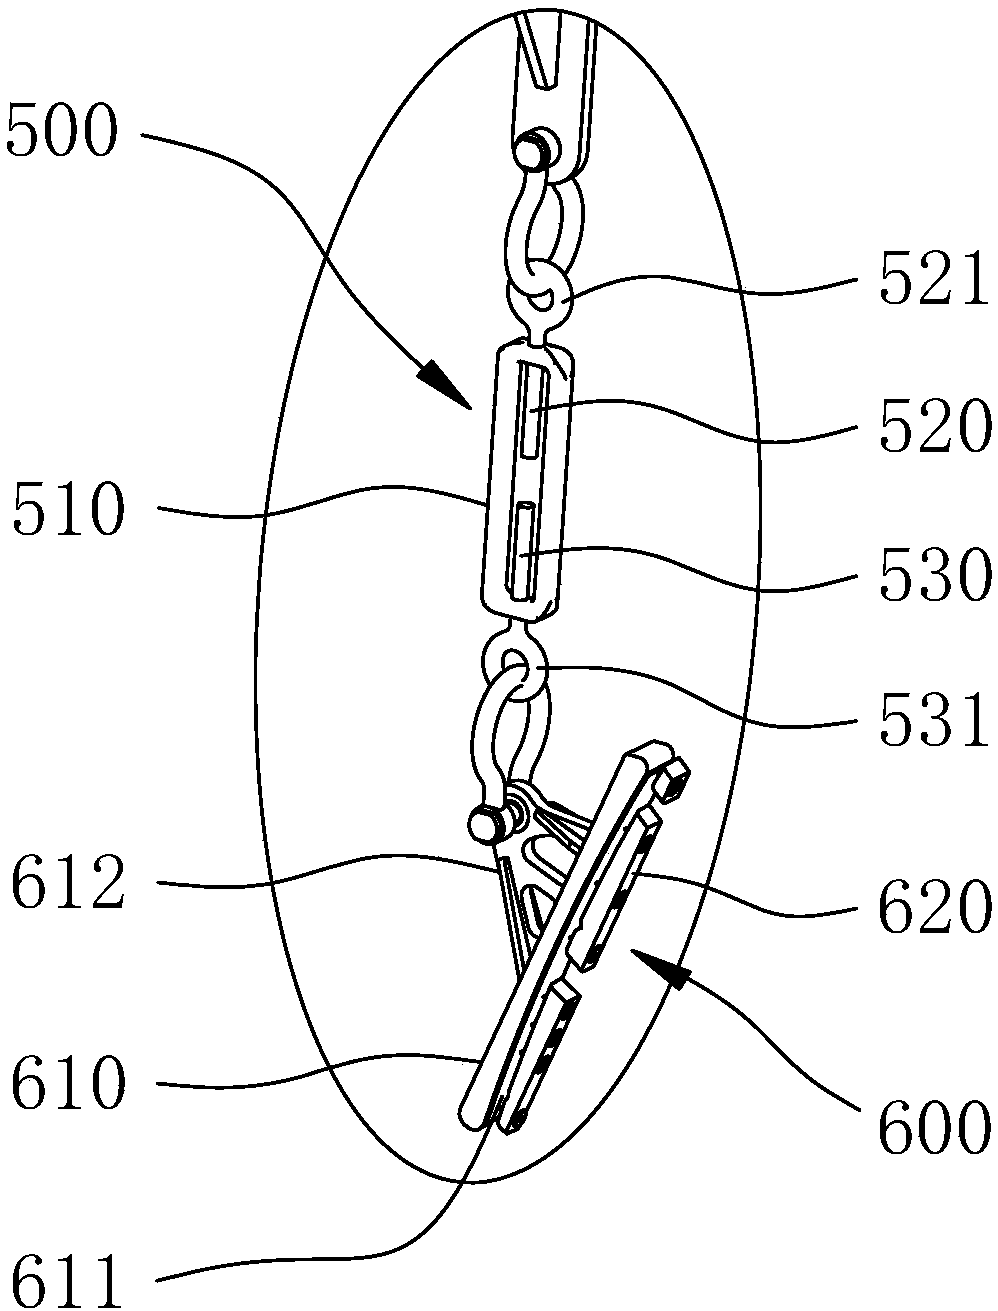 Hoisting and transferring device for barrel-shaped skin panel components